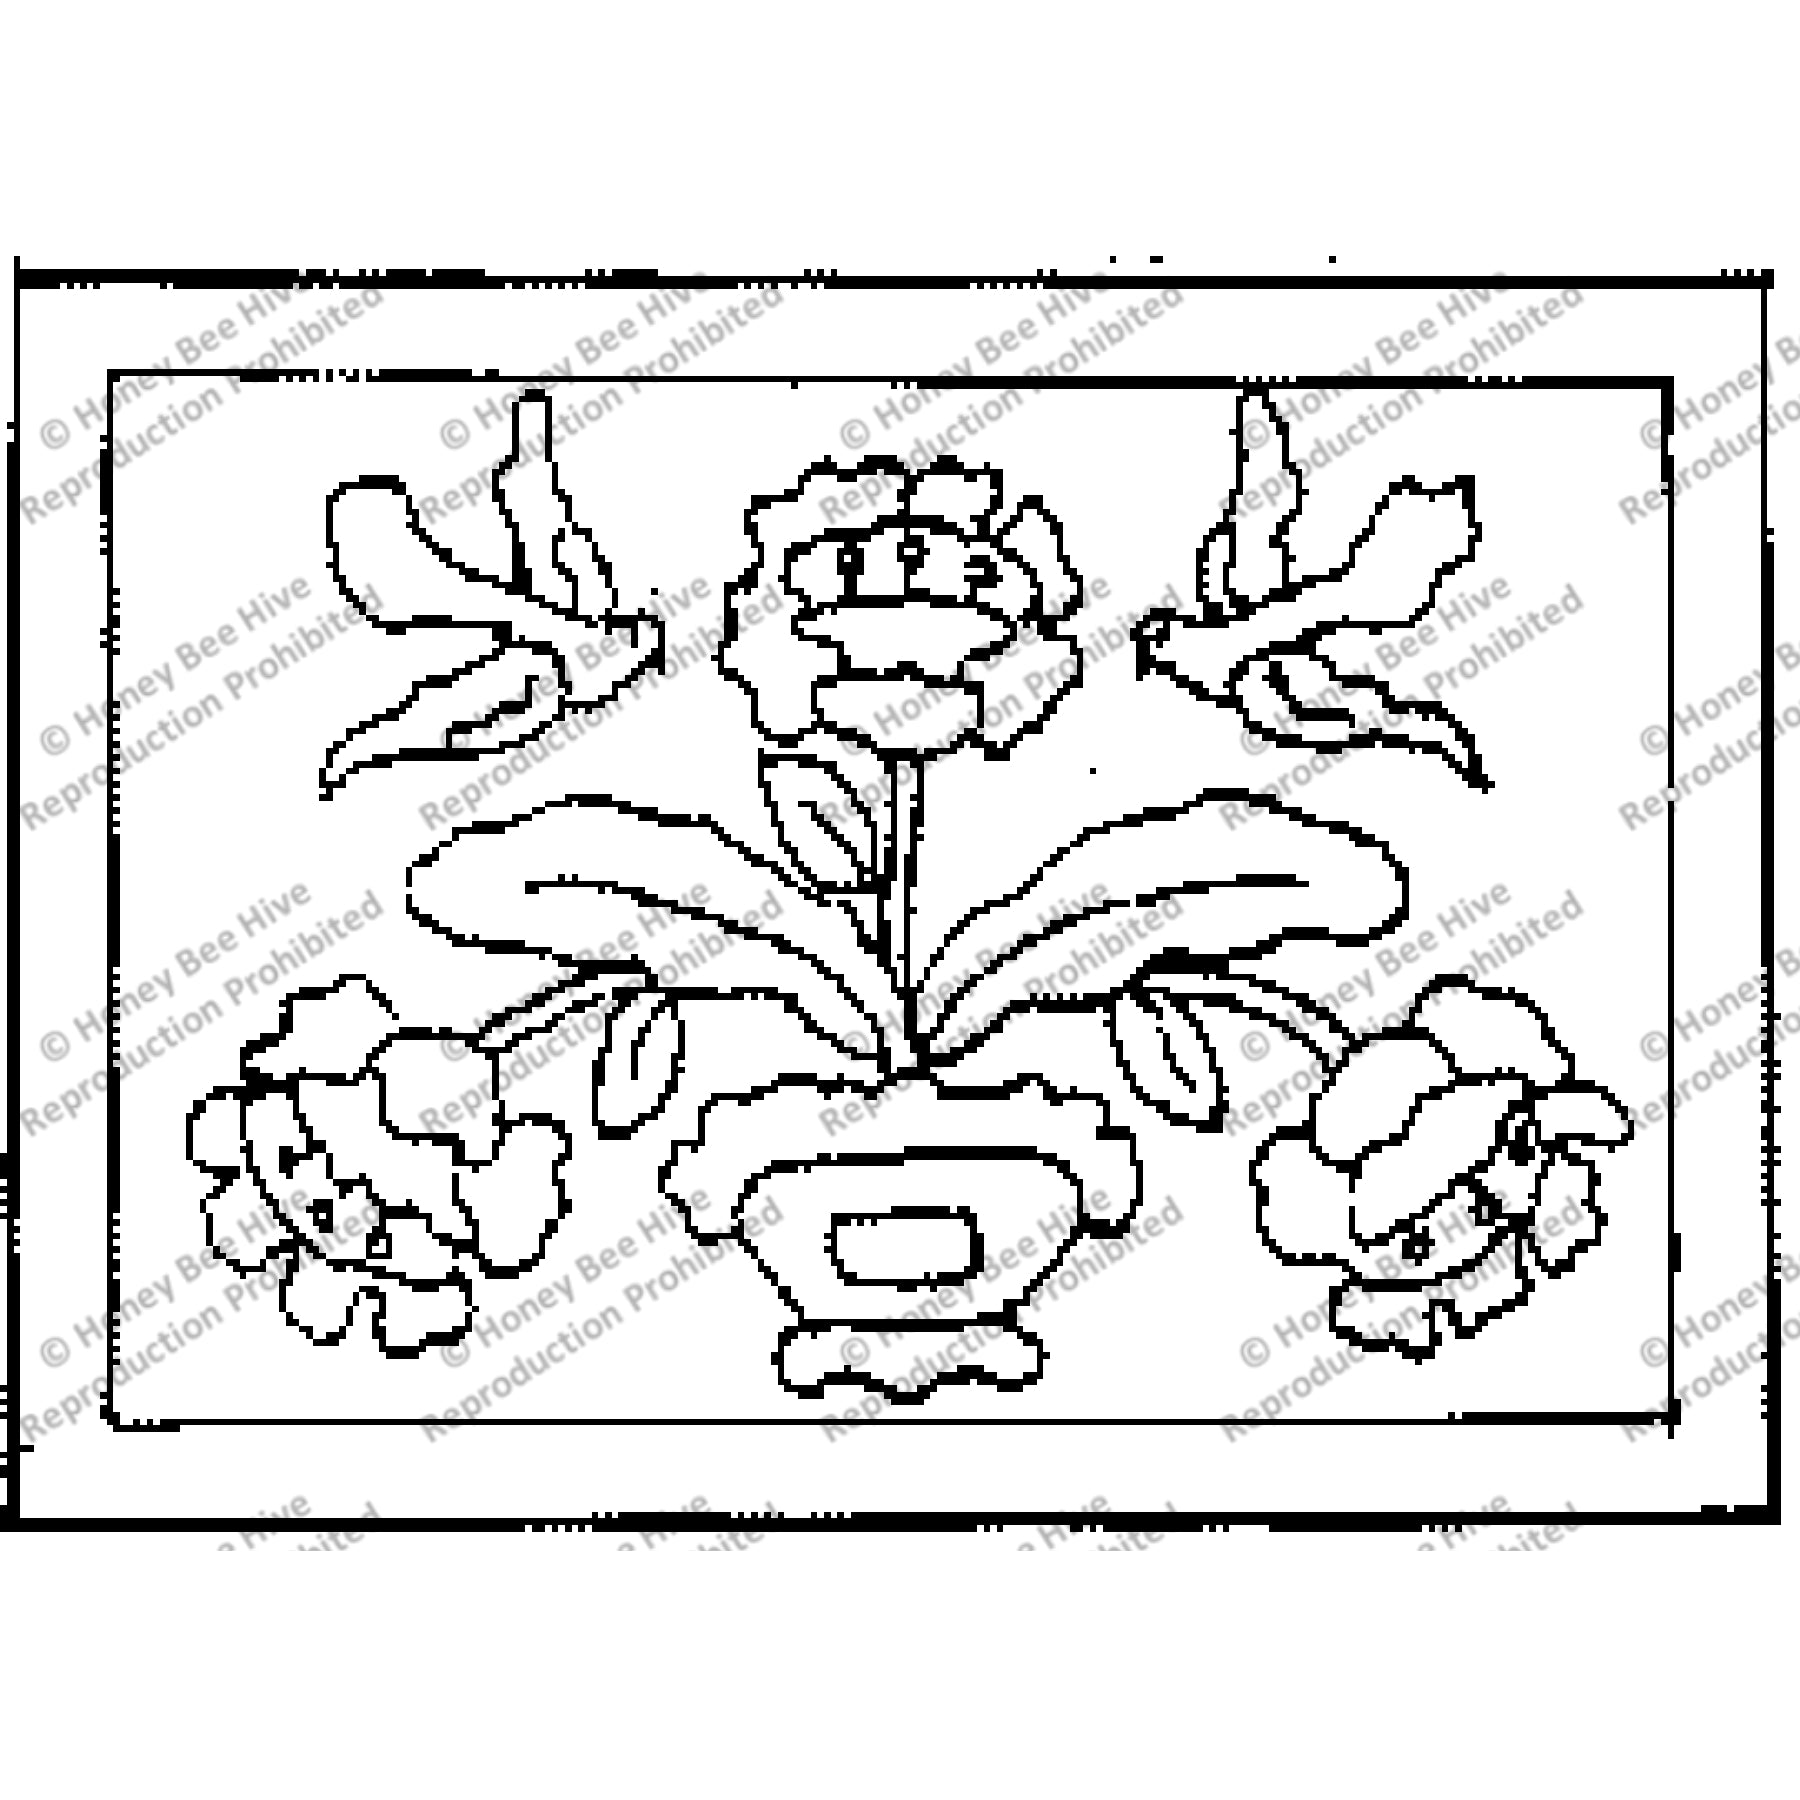 Naper Floral - Small, rug hooking pattern